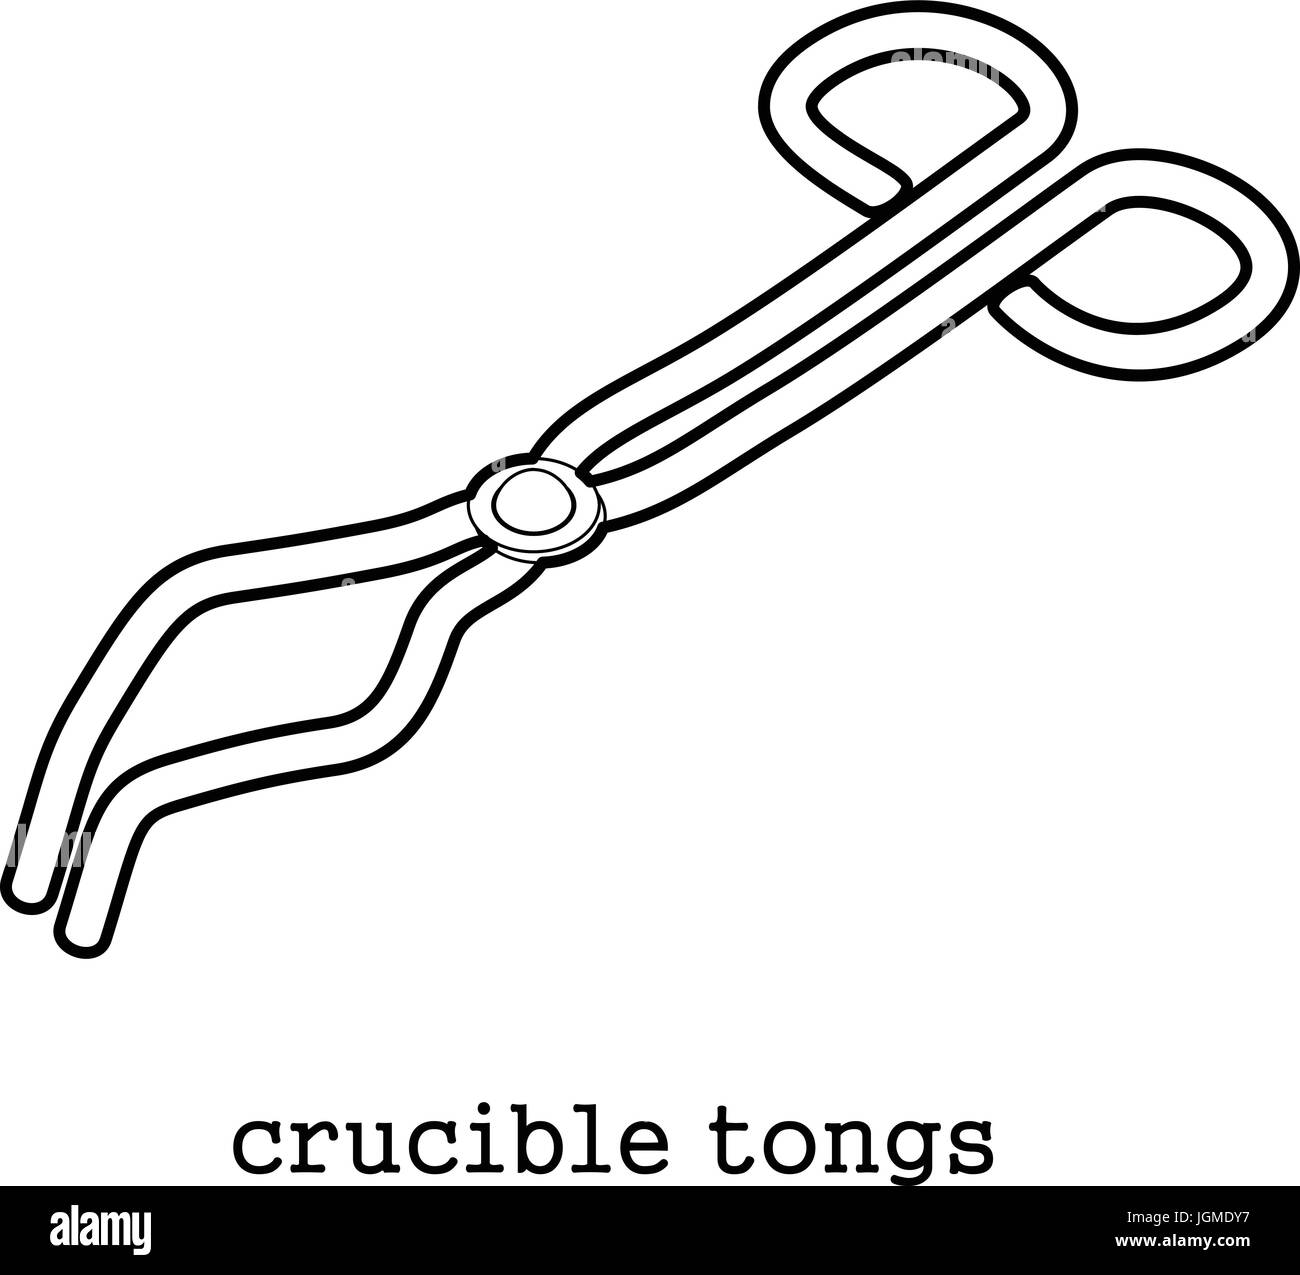 Crucible tongs isolated Black and White Stock Photos & Images - Alamy